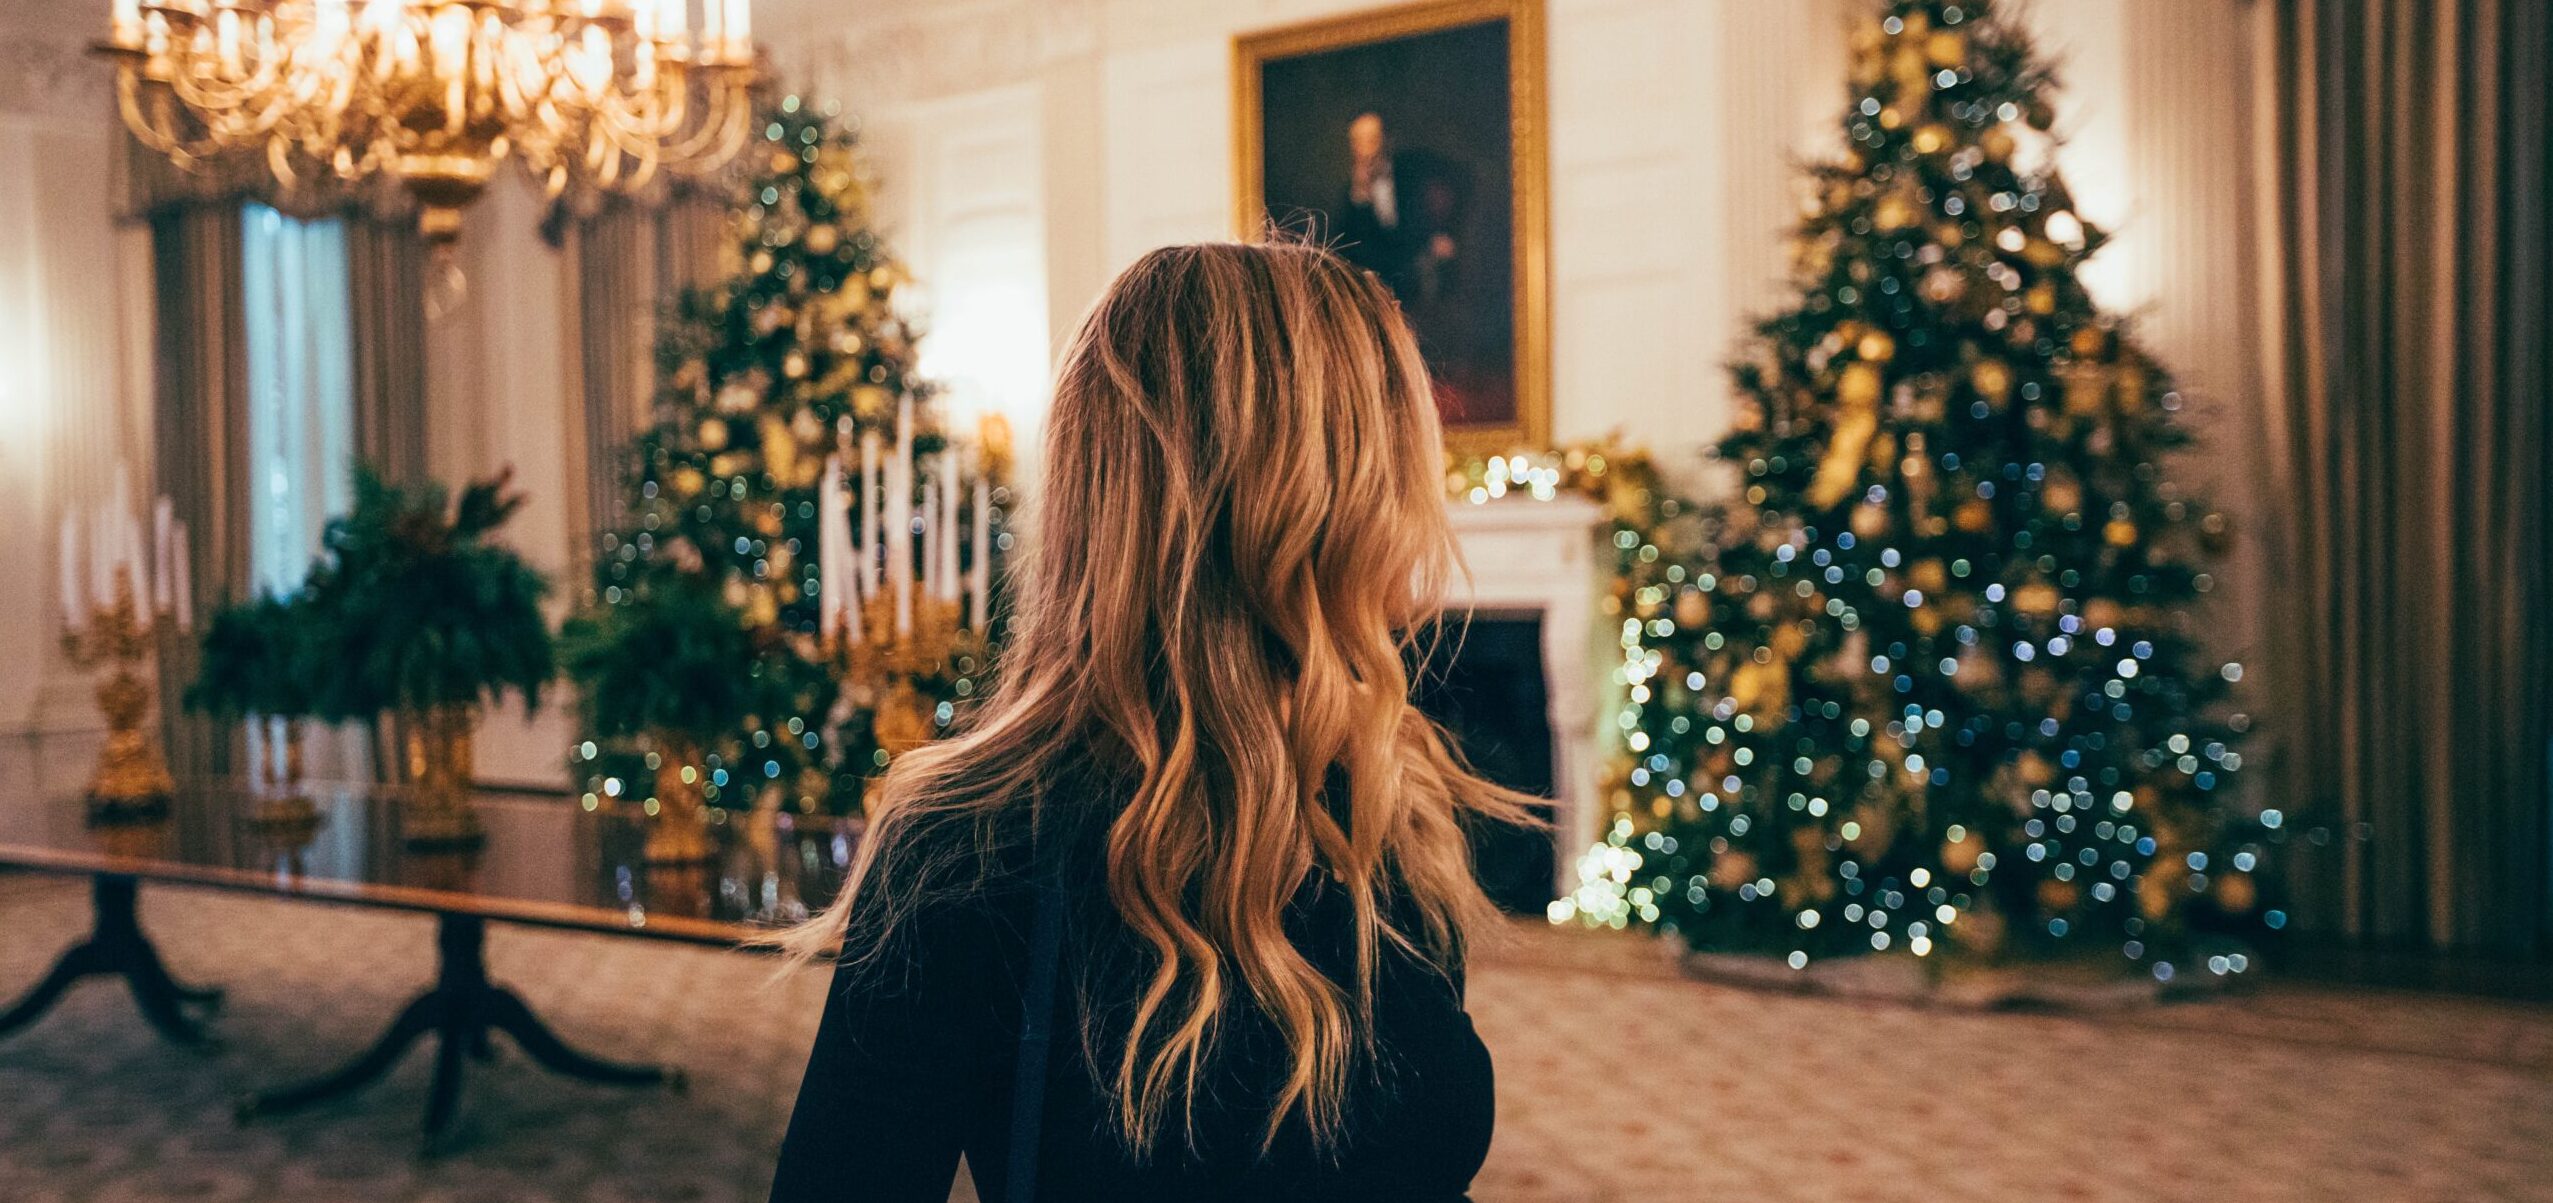 HOW TO MAINTAIN HEALTHY HAIR DURING THE HOLIDAY SEASON